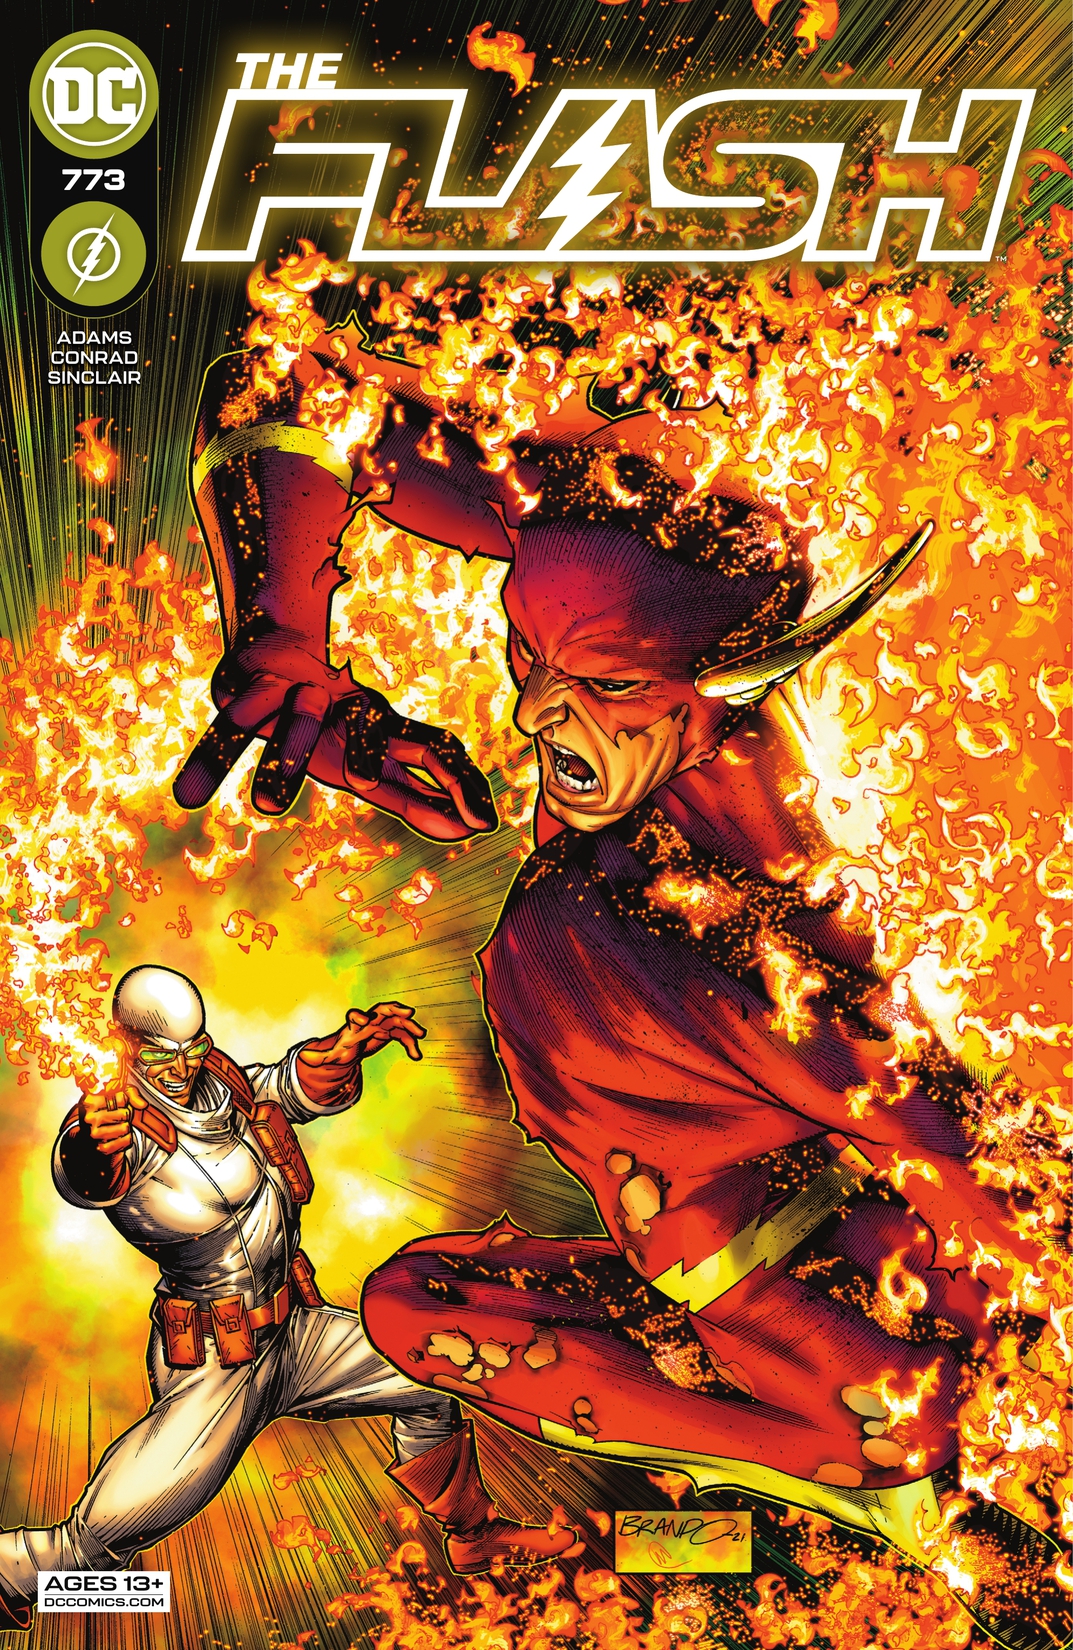 The Flash (2016-) #773 preview images